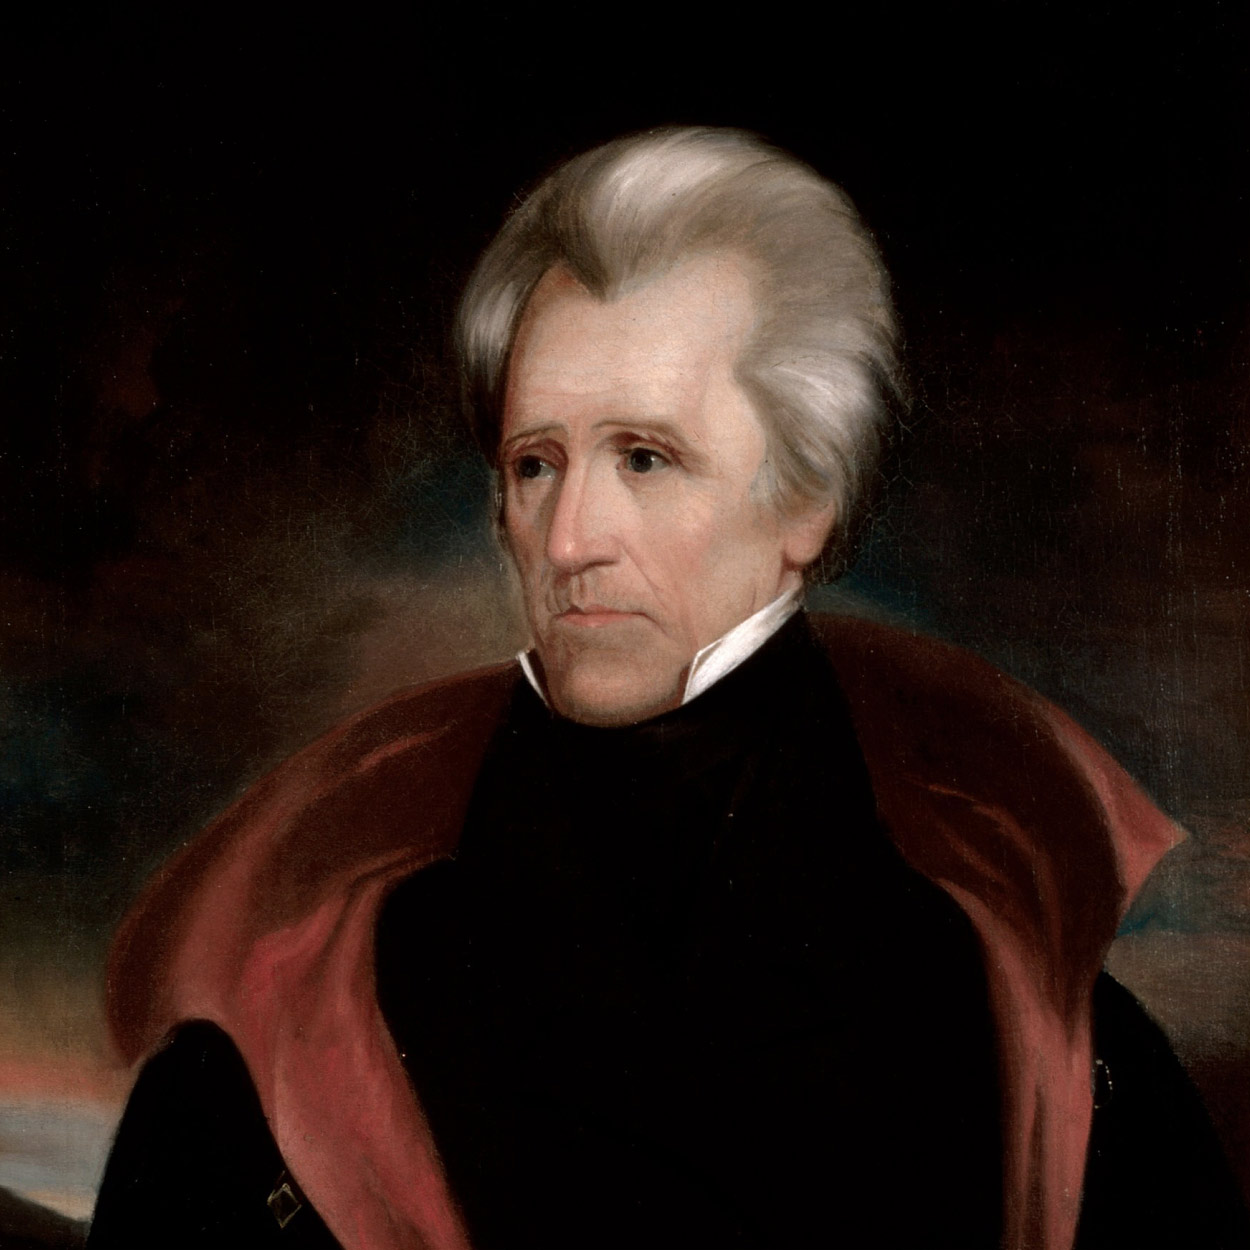 Portrait of Andrew Jackson, the 7th President of the United States